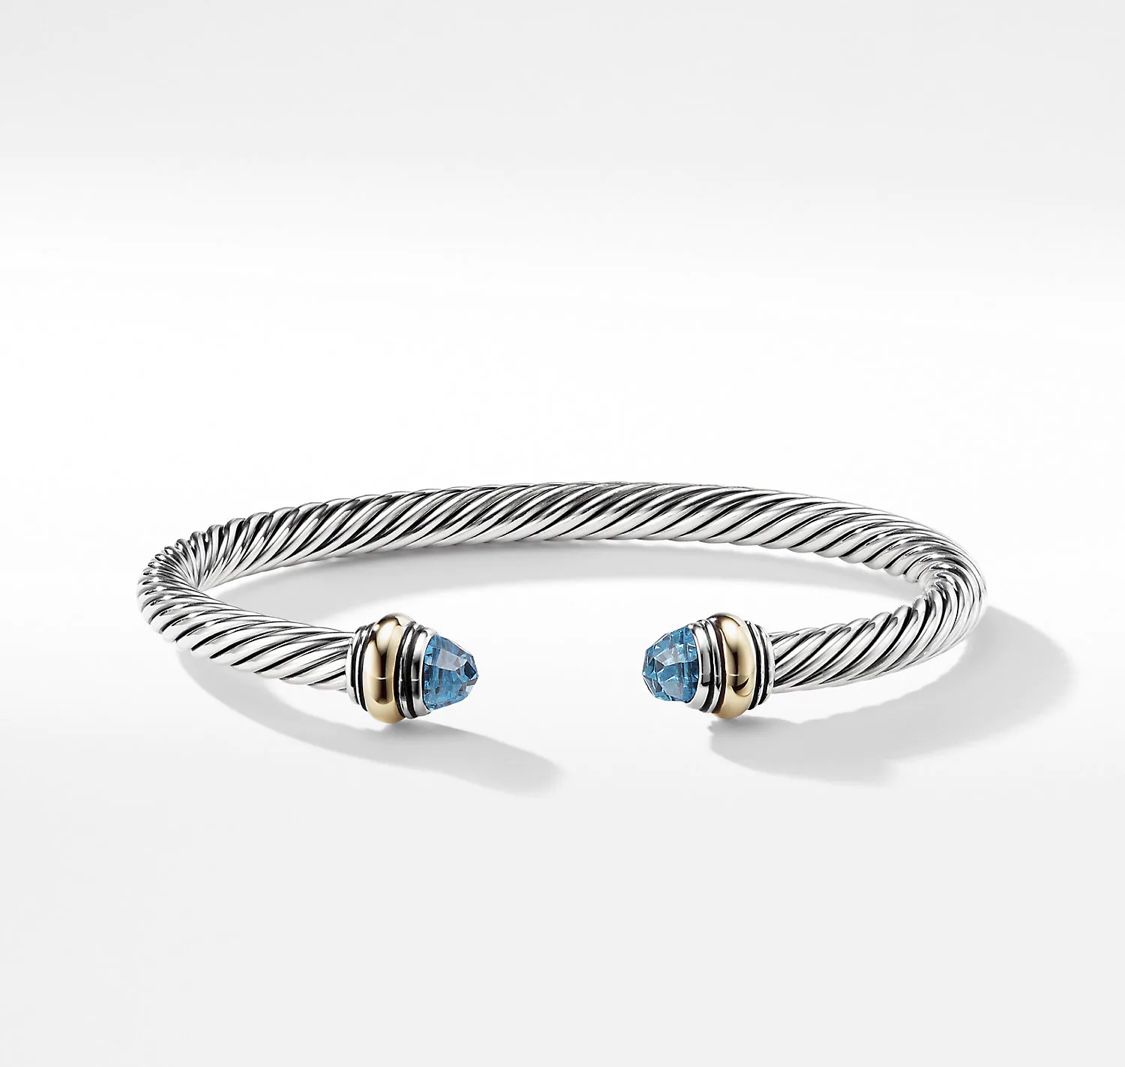 Cable Classic Bracelet with Blue Topaz and 14K Gold, 5mm